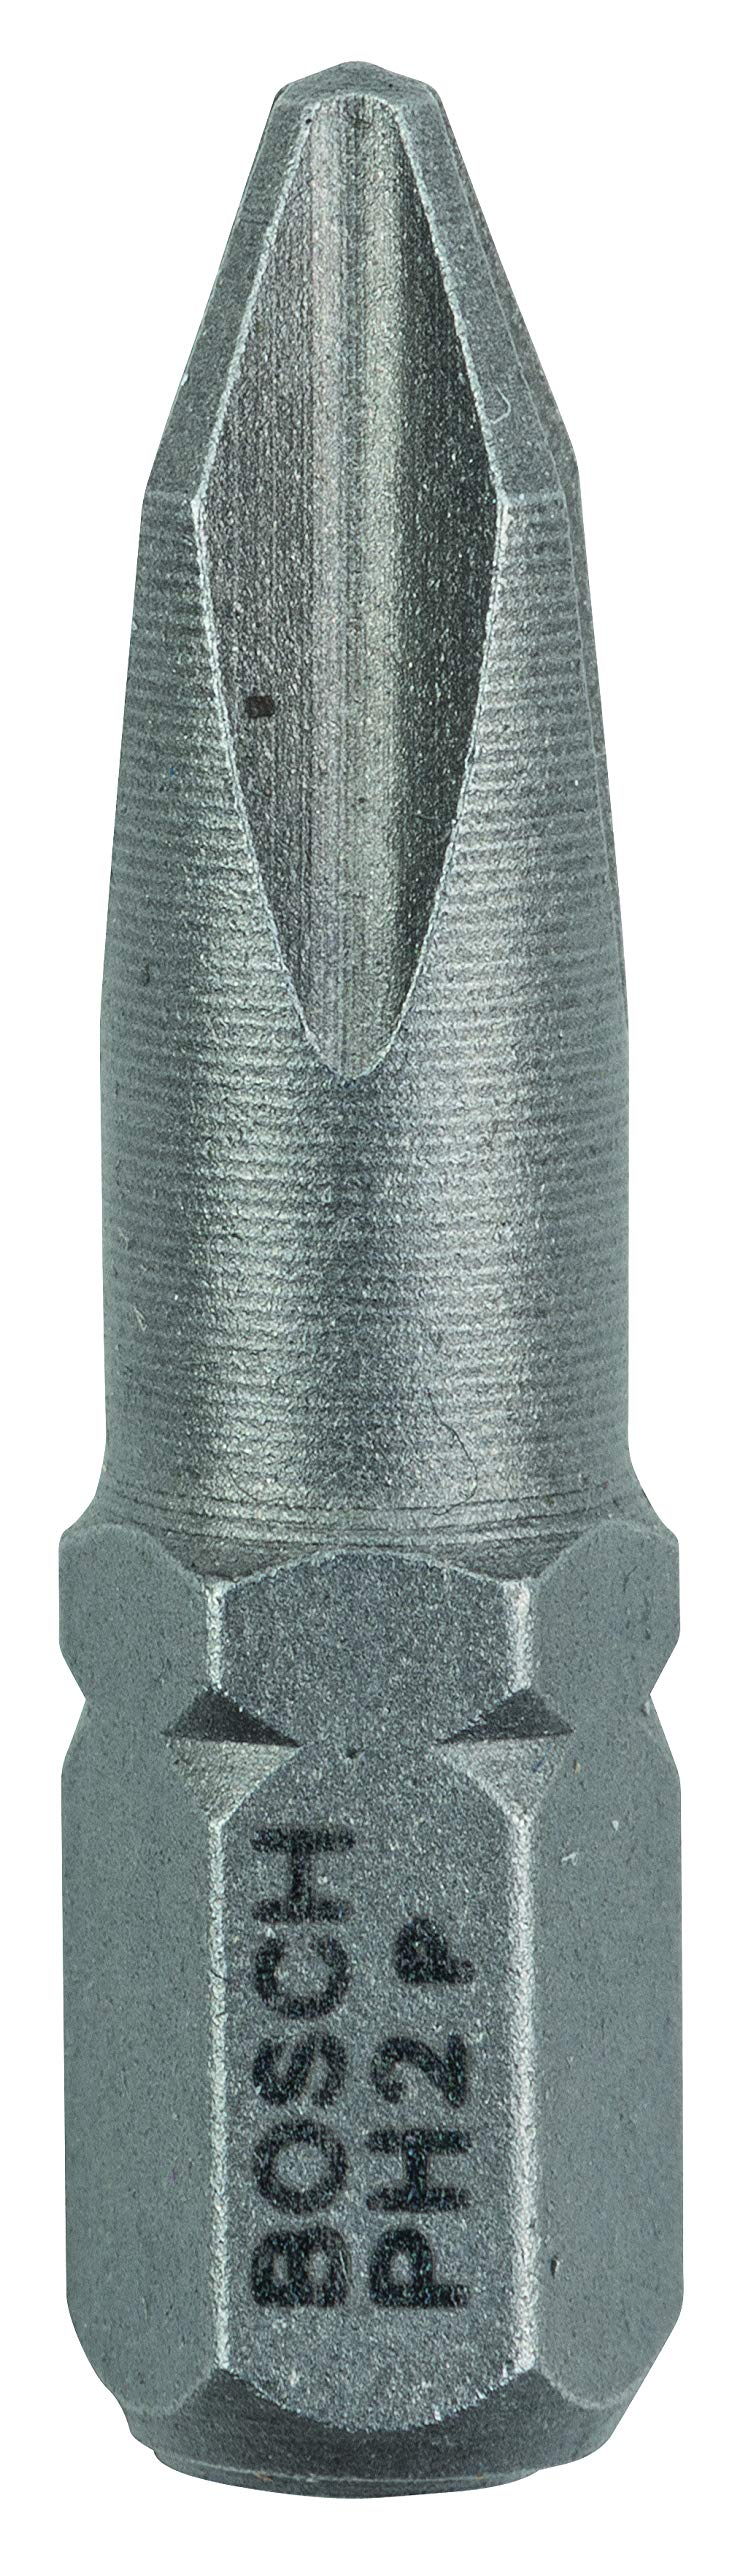 Bosch EXTRA HARD SCREWDRIVER BIT FOR ROTARY DRILLS/DRIVERS - 2607001514